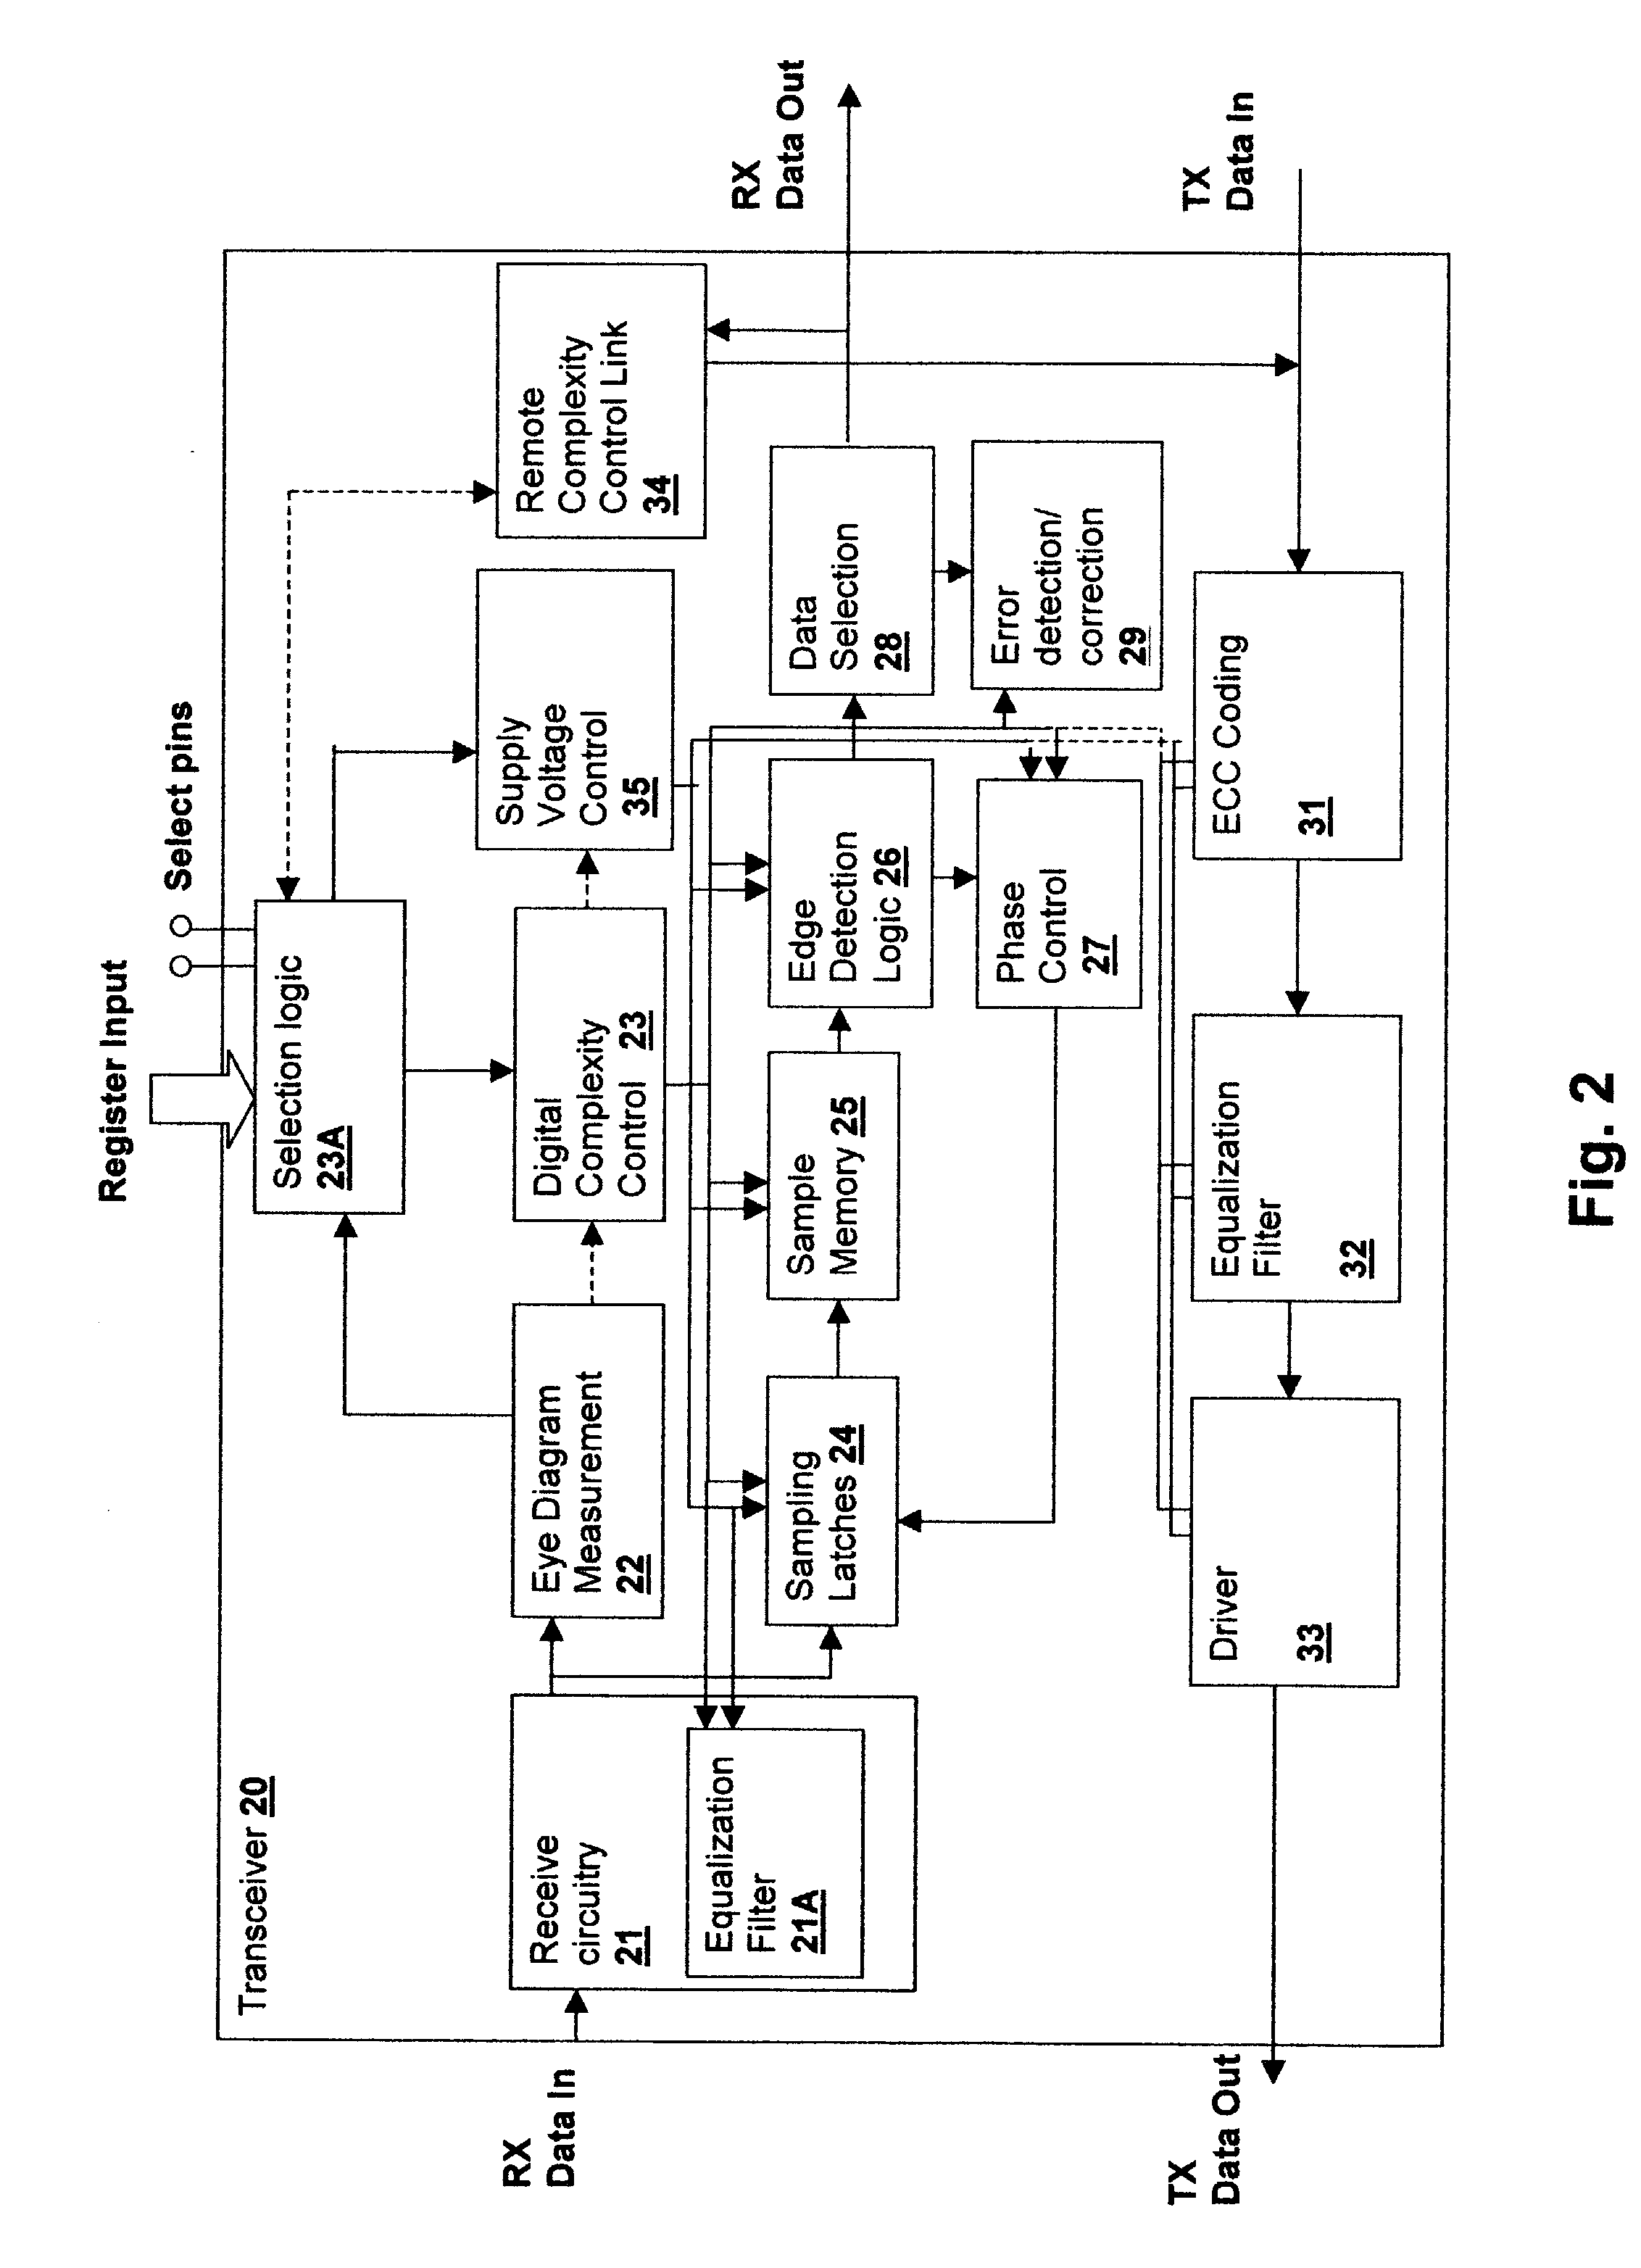 Interface transceiver power management method and apparatus including controlled circuit complexity and power supply voltage